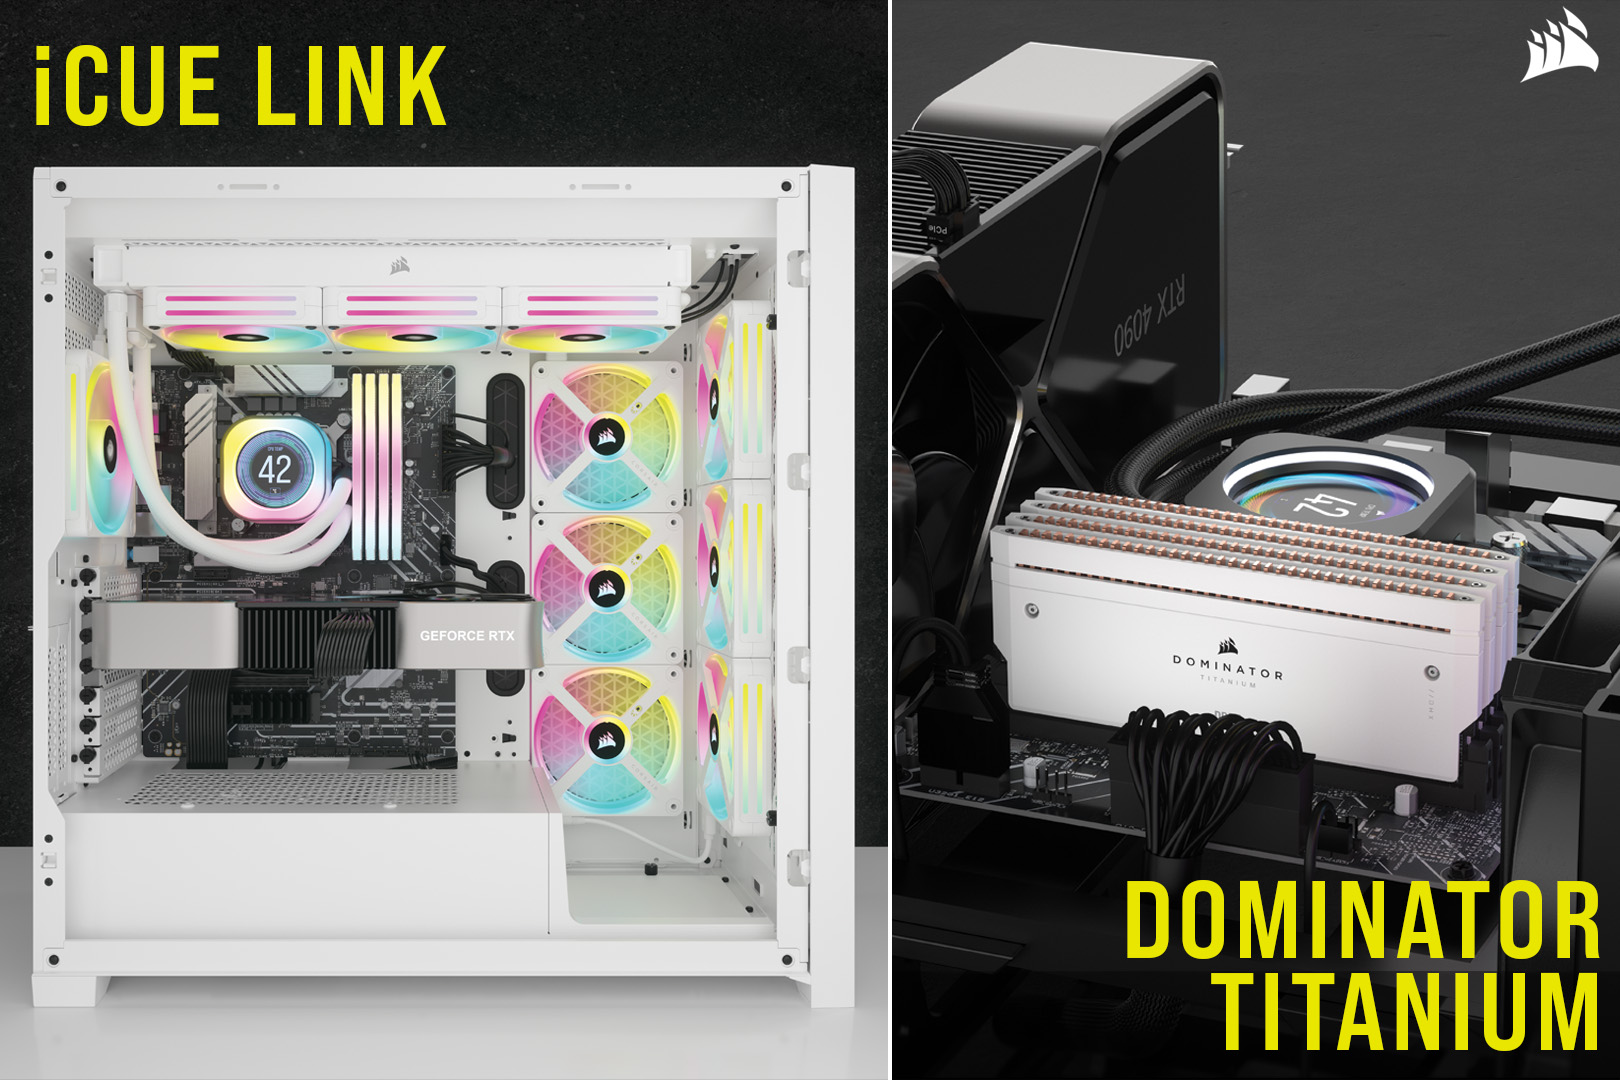 smør Bevæger sig ikke samvittighed CORSAIR on X: "CORSAIR @ #Computex2023 presents: iCUE LINK - Our solution  to cable management 🔗 https://t.co/4DafBid4lx DOMINATOR TITANIUM - The  newest entry to our DDR5 lineup 🛠 https://t.co/4aes1ldTkn  https://t.co/P8GAASOJwx" / X